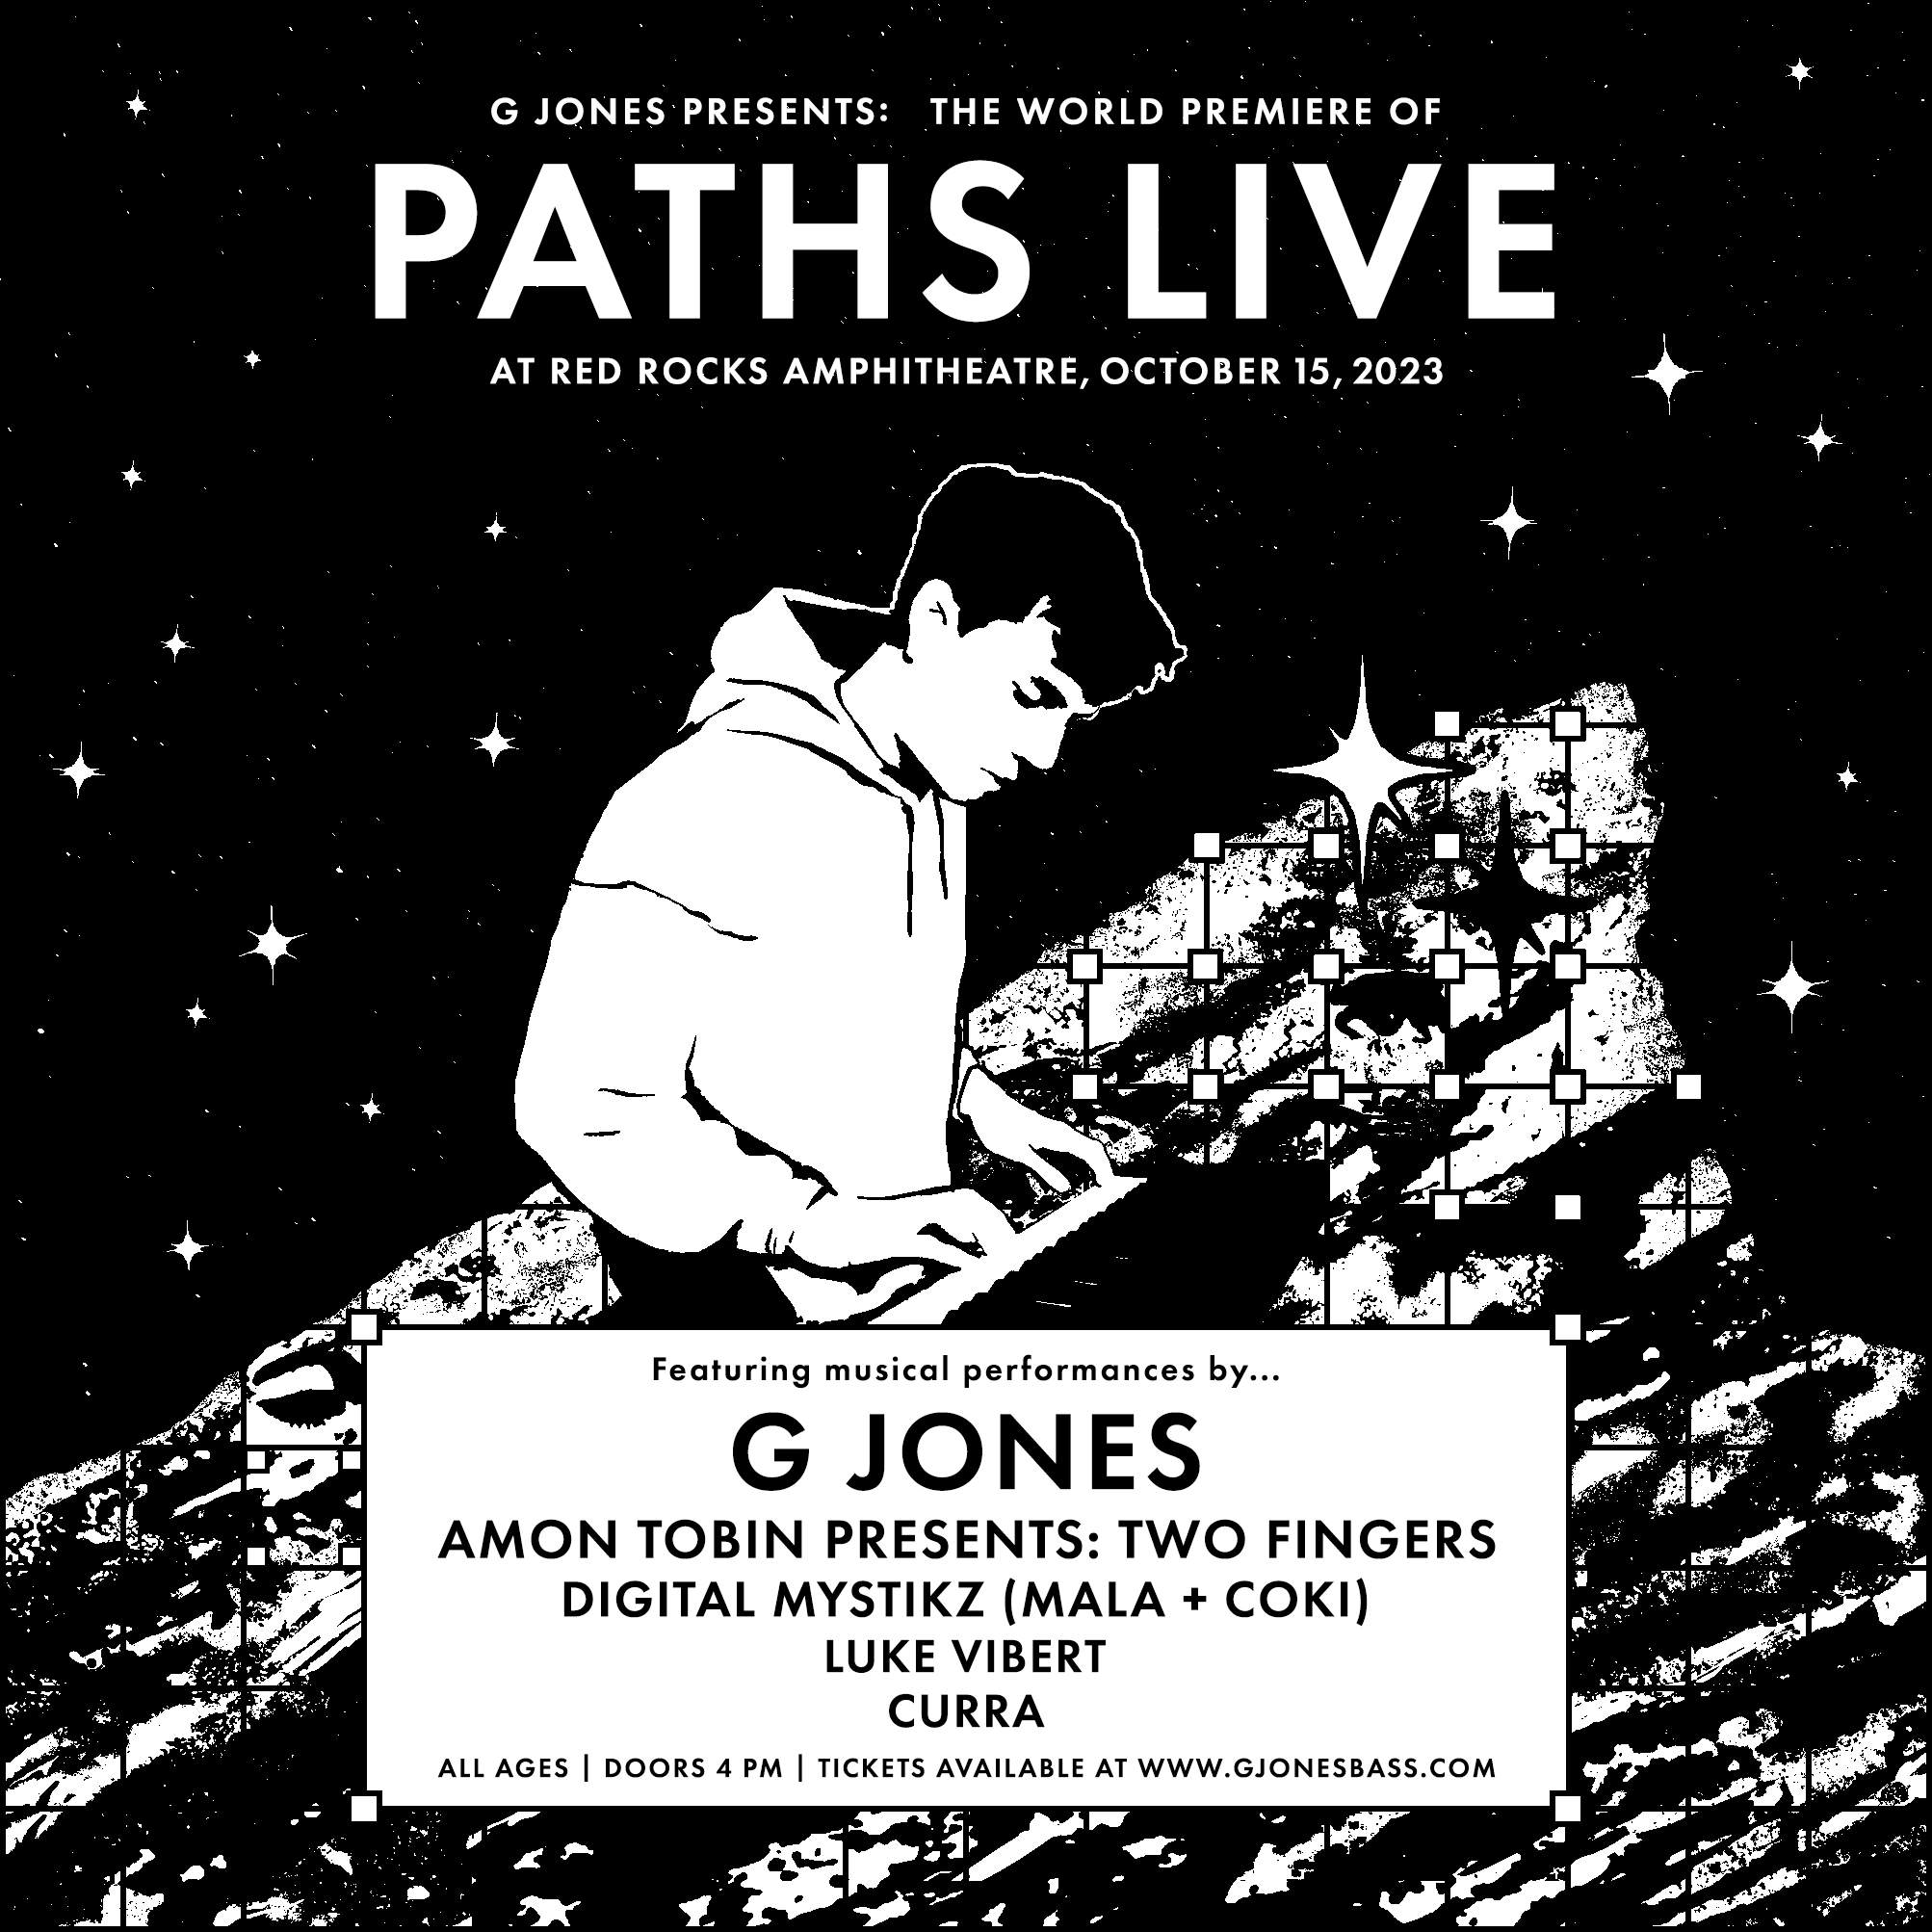 G Jones presents: The World Premiere of Paths Live at Red Rocks - フライヤー表